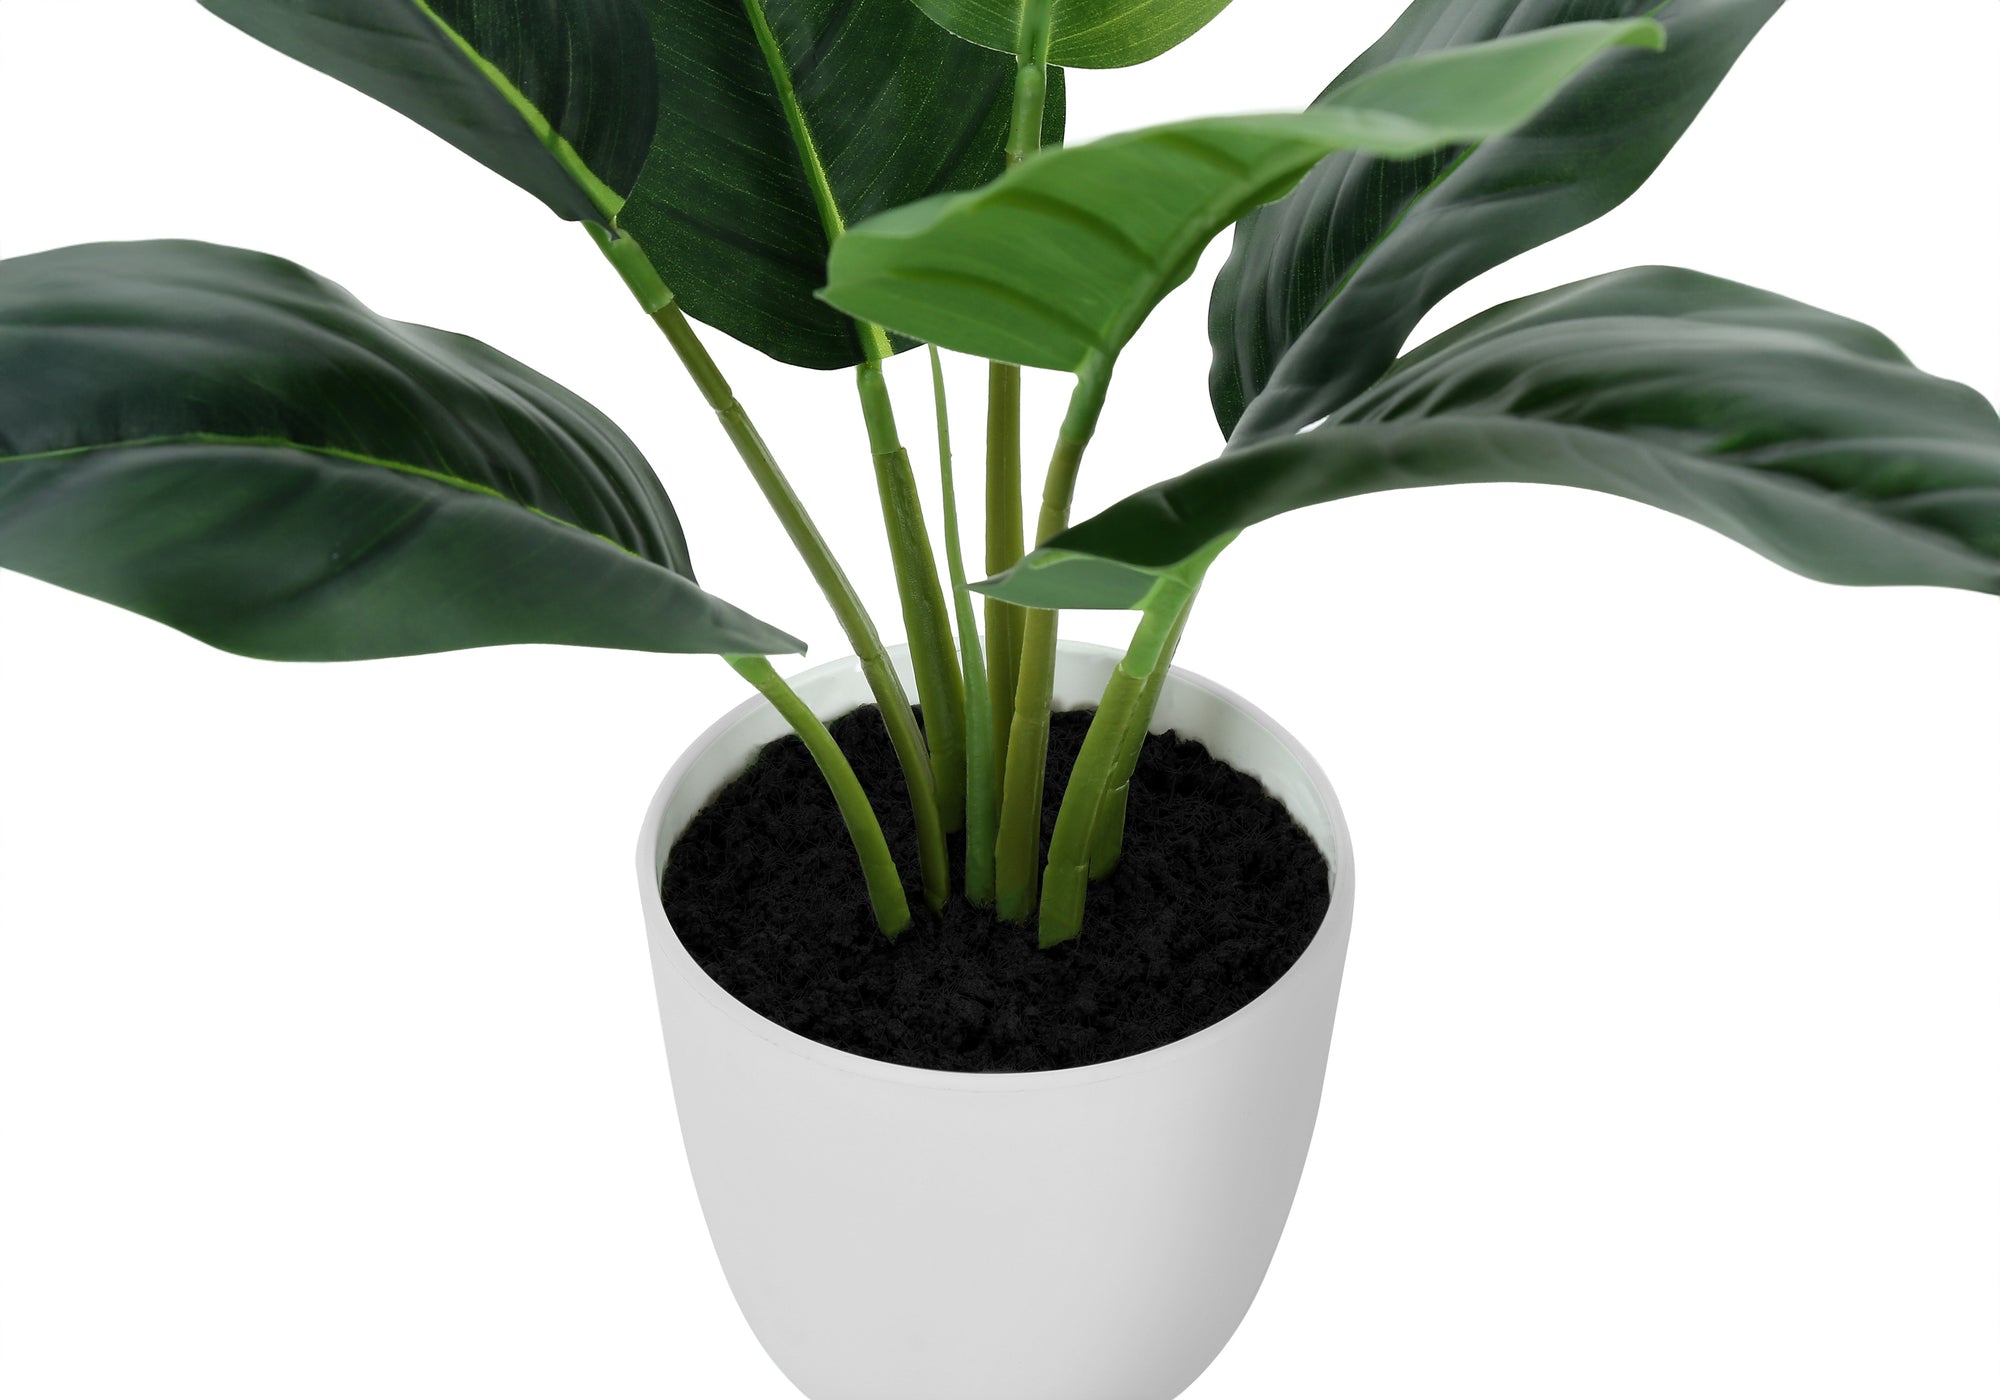 MN-239502    Artificial Plant, 17" Tall, Aureum, Indoor, Faux, Fake, Table, Greenery, Potted, Real Touch, Decorative, Green Leaves, White Pot